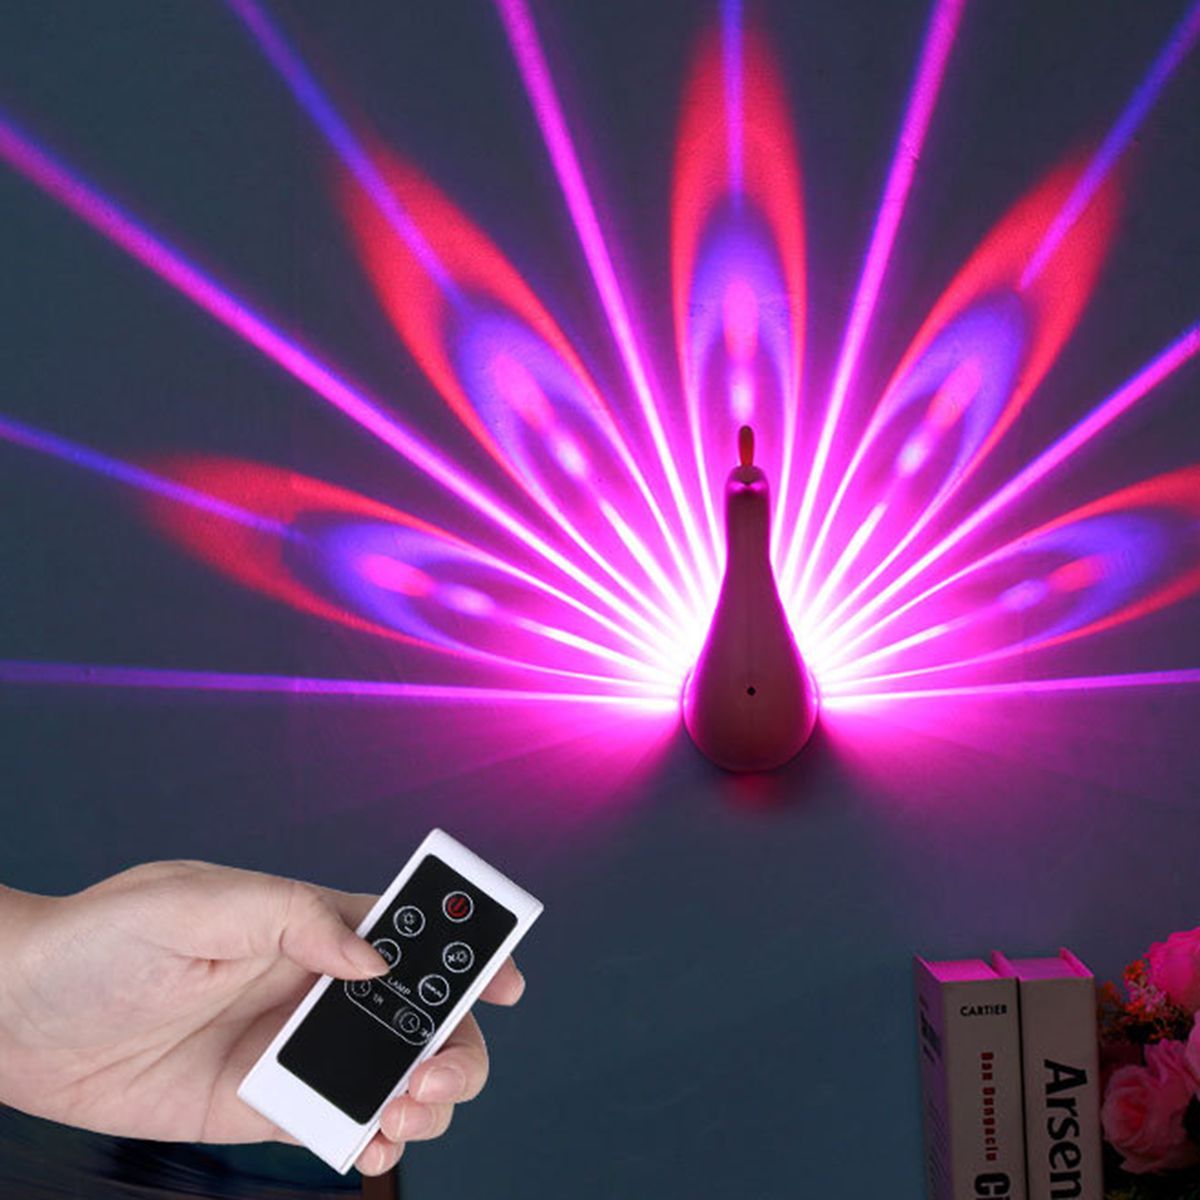 Remote-Control-Night-Light-Projector-7-Color-Changing-LED-Peacock-Wall-Lamp-Gift-1570146